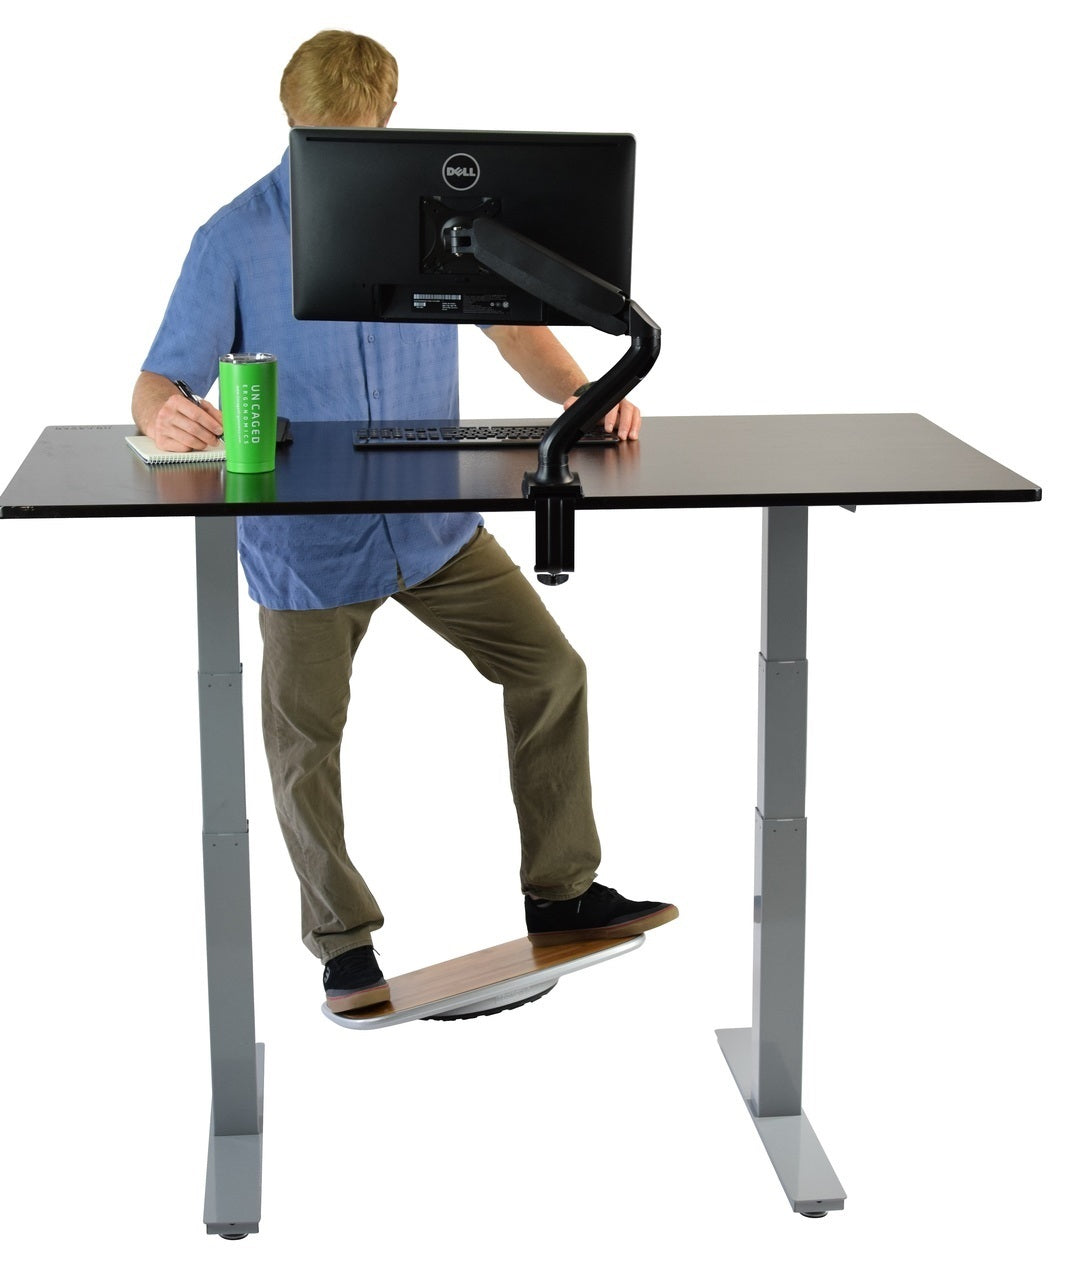 RISE UP Best in Class Electric Standing Desk